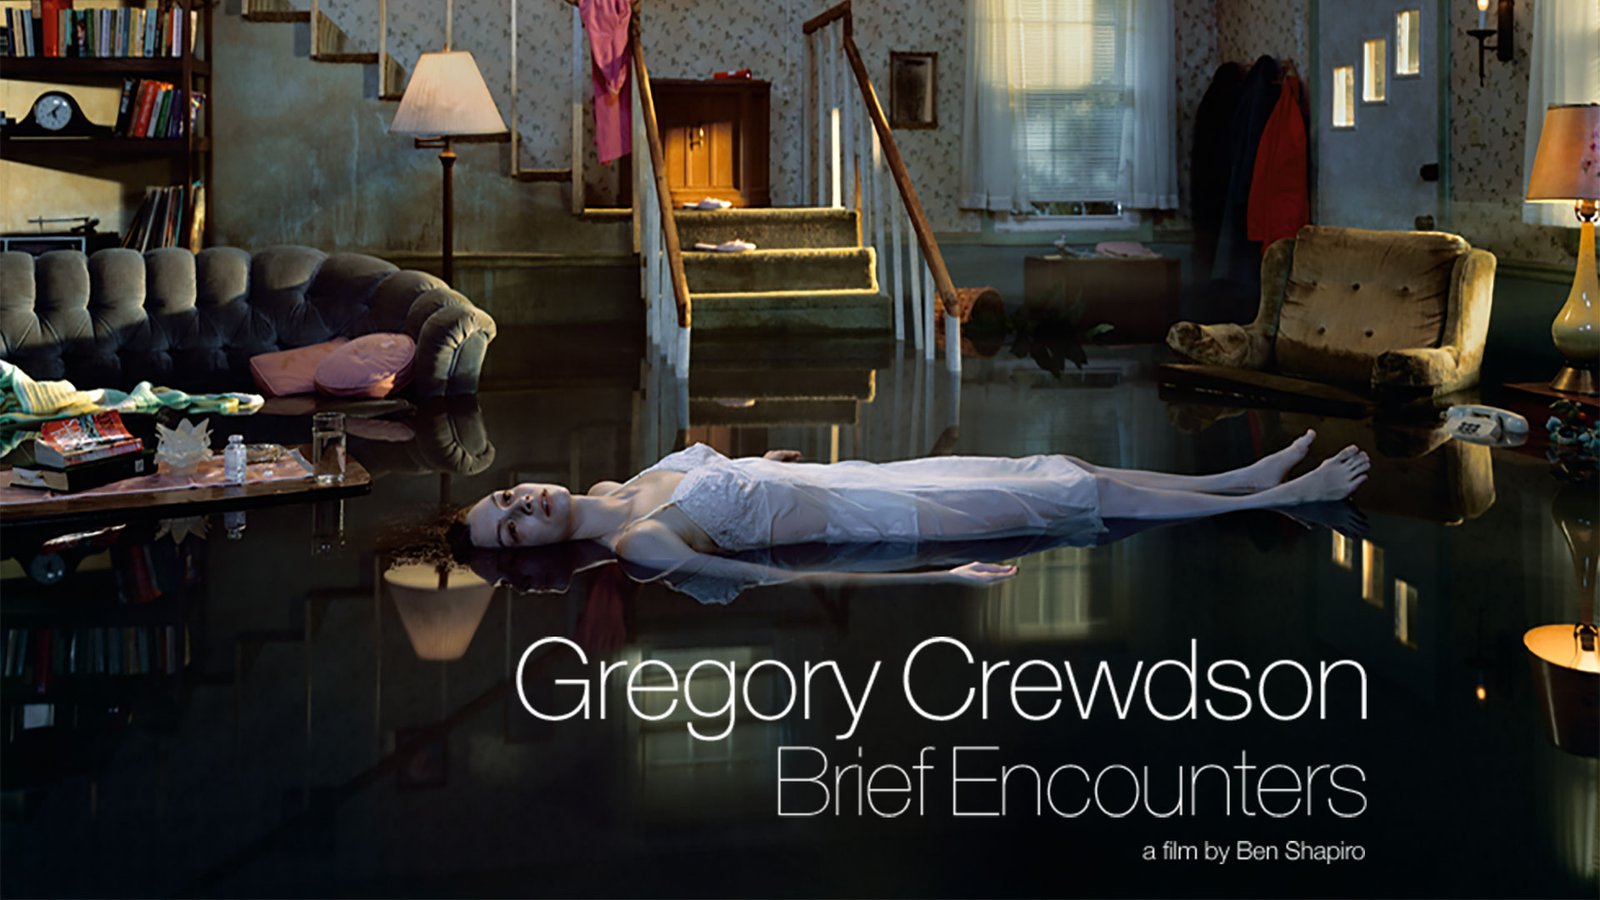 Gregory Crewdson: Brief Encounters - A Look at the Photographers' Process